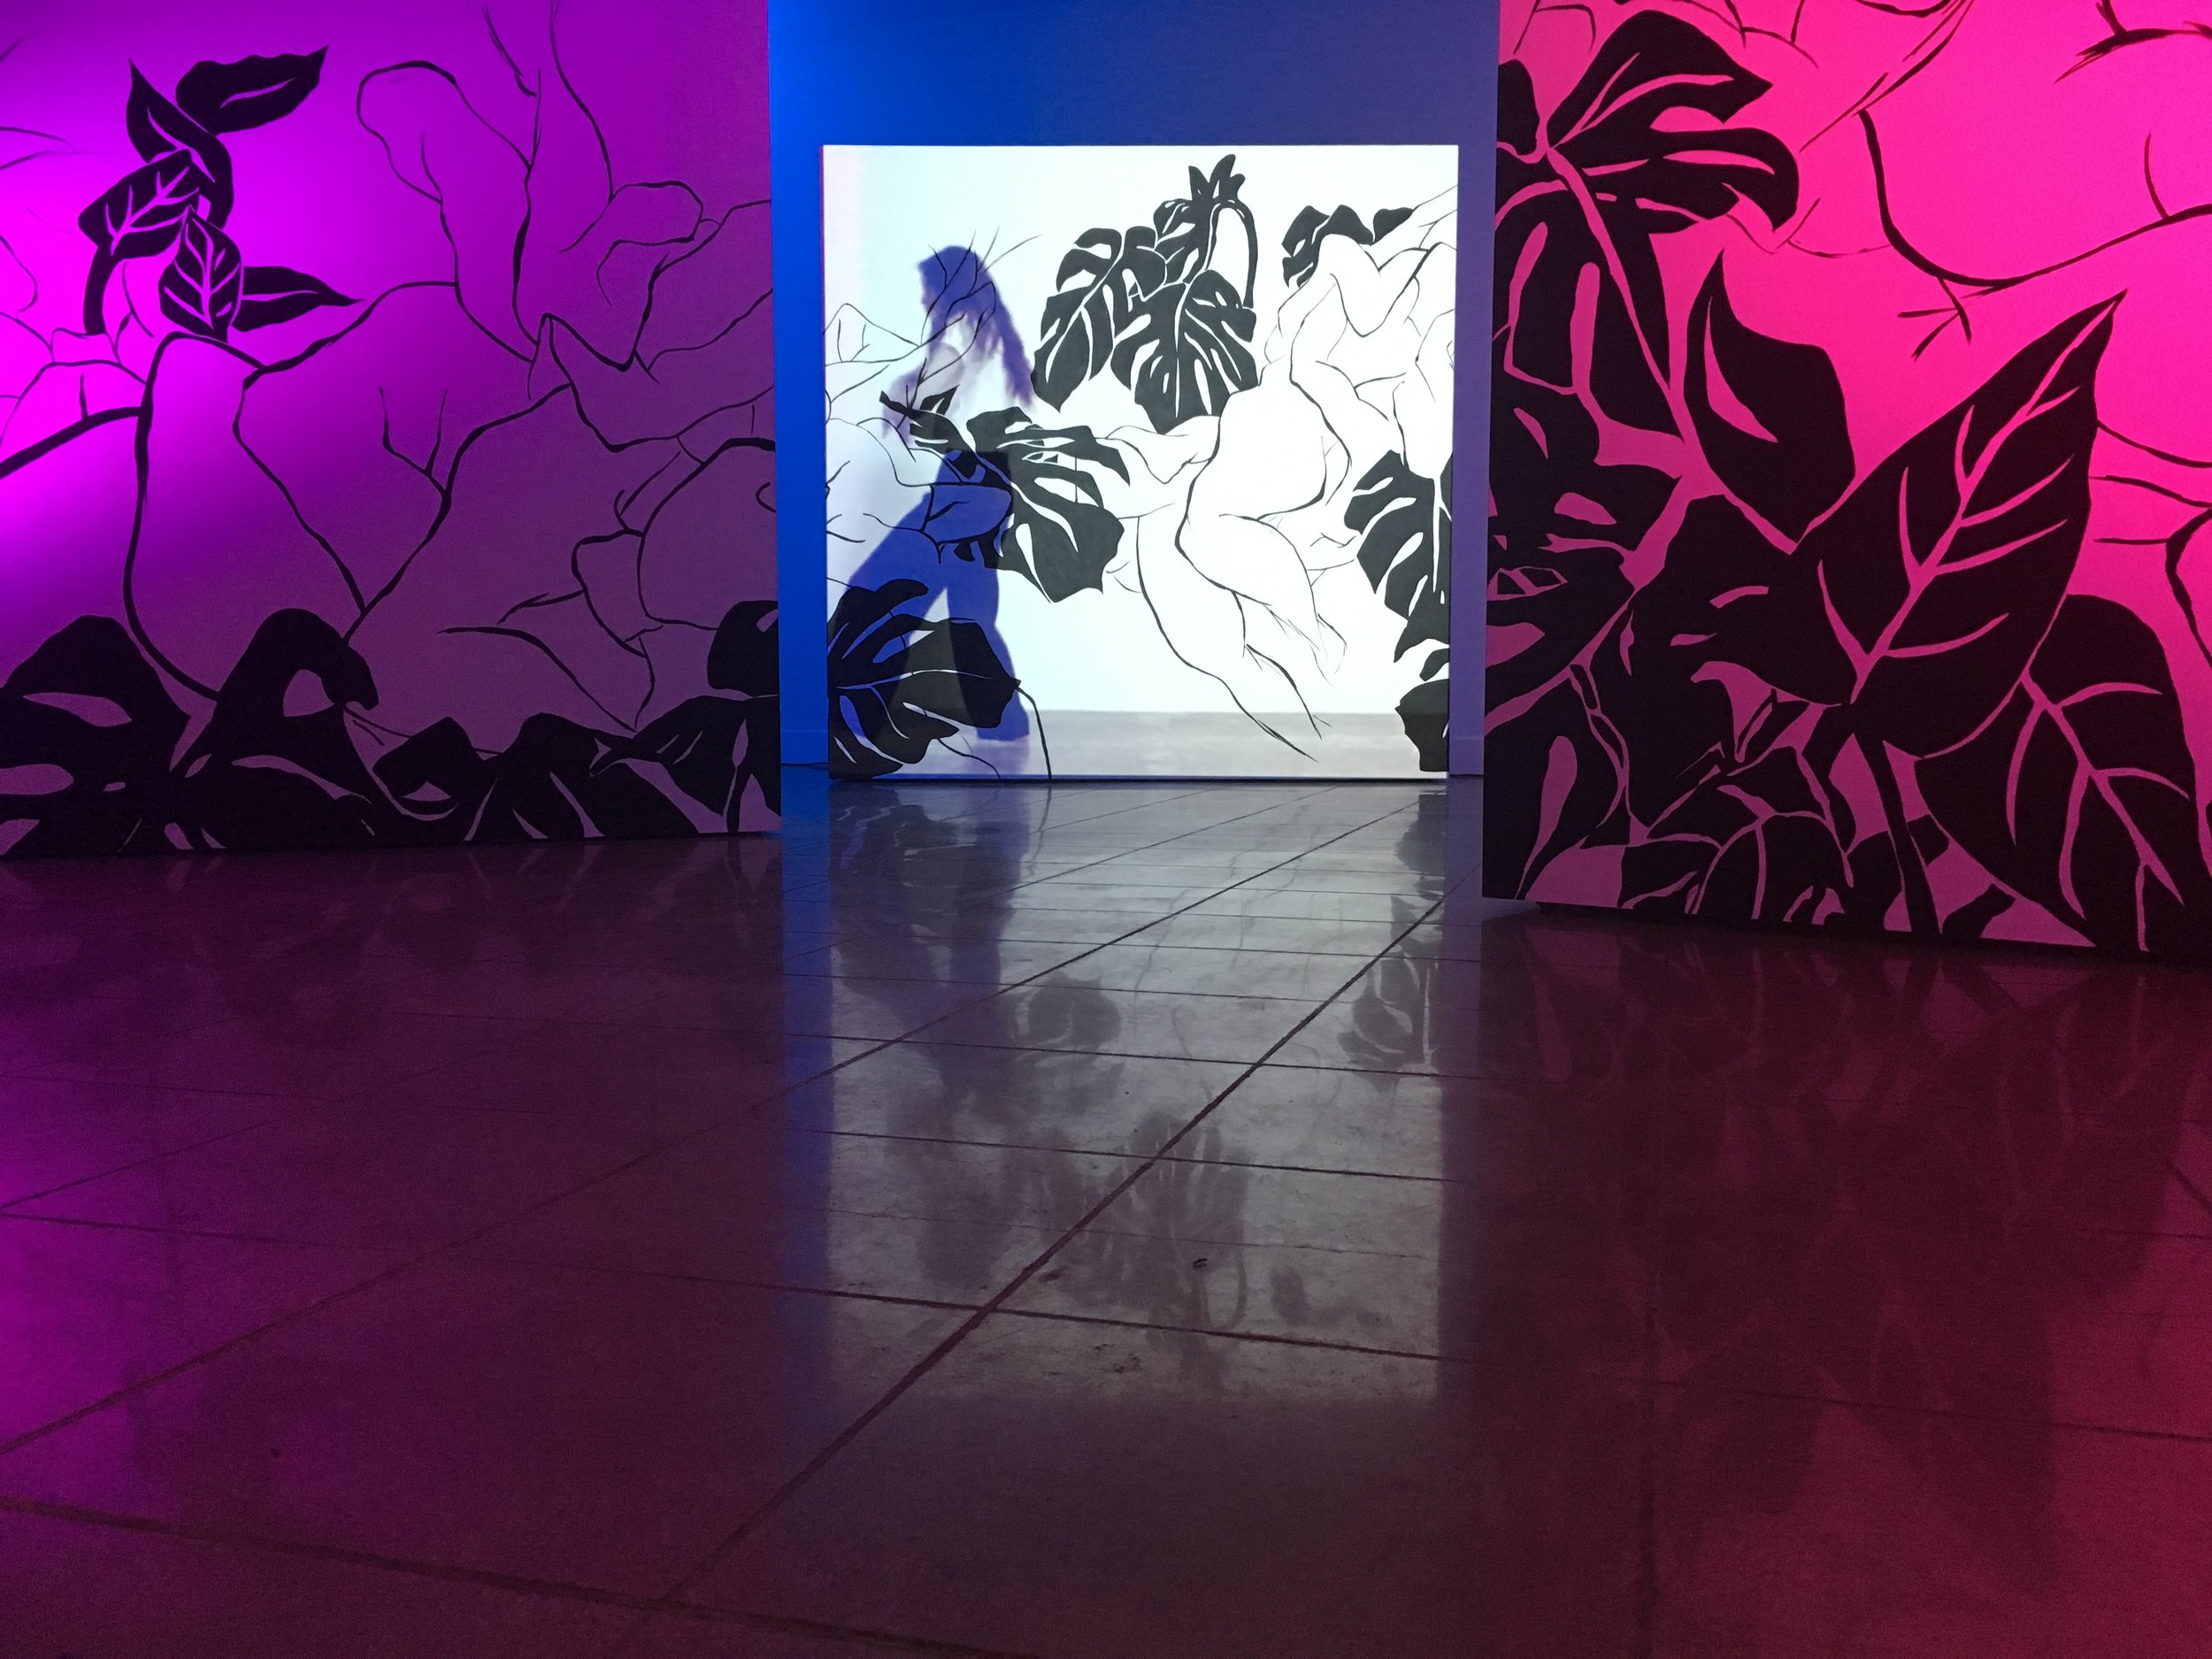 Installation View of "Afterlight"